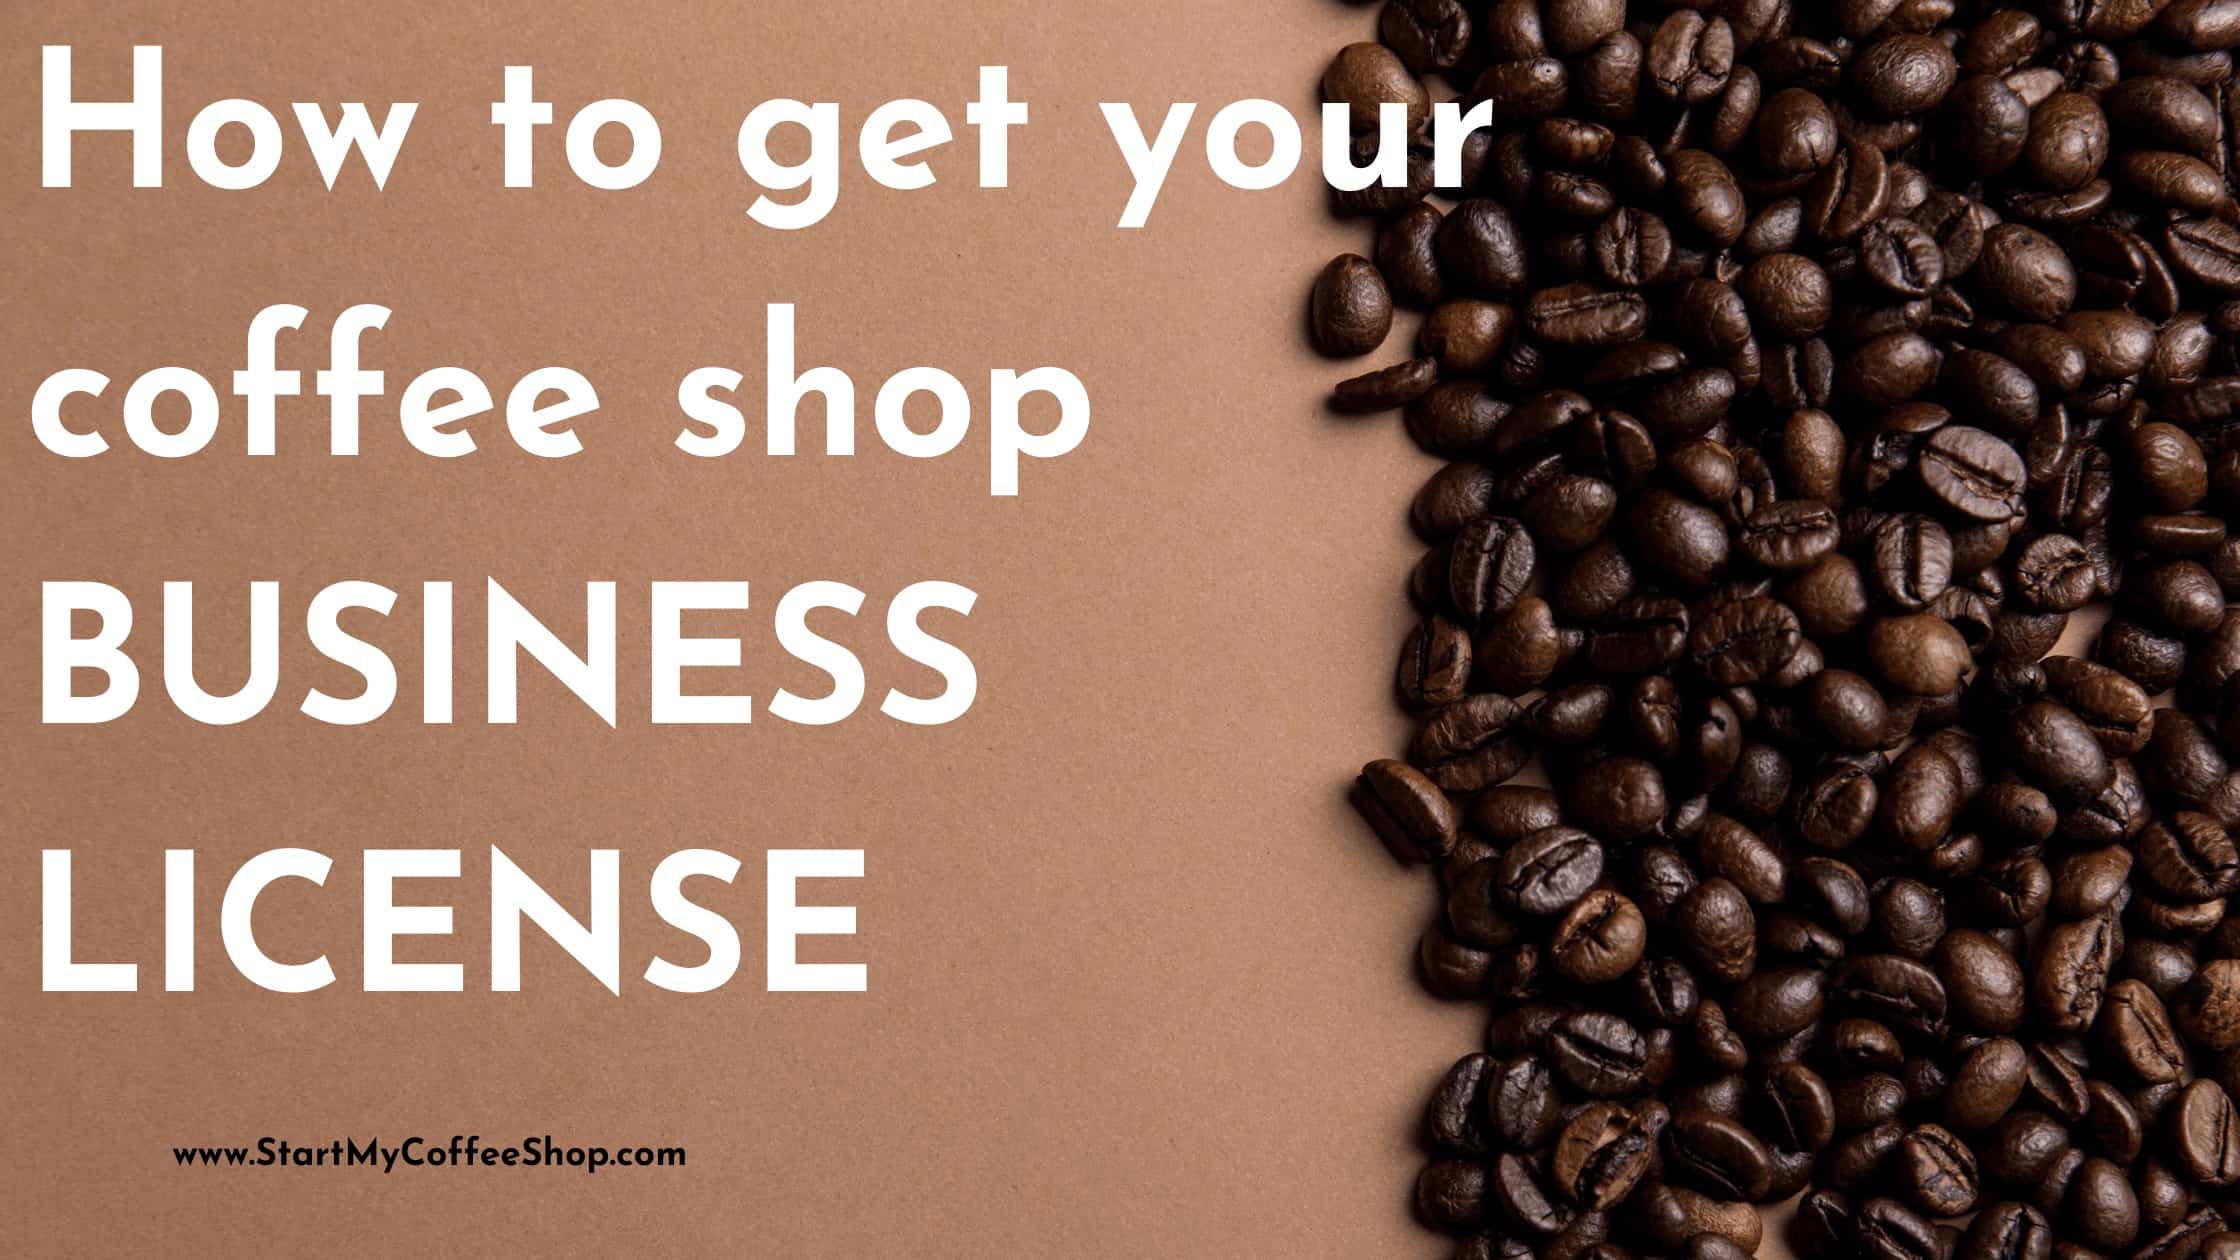 How to get your coffee shop BUSINESS LICENSE